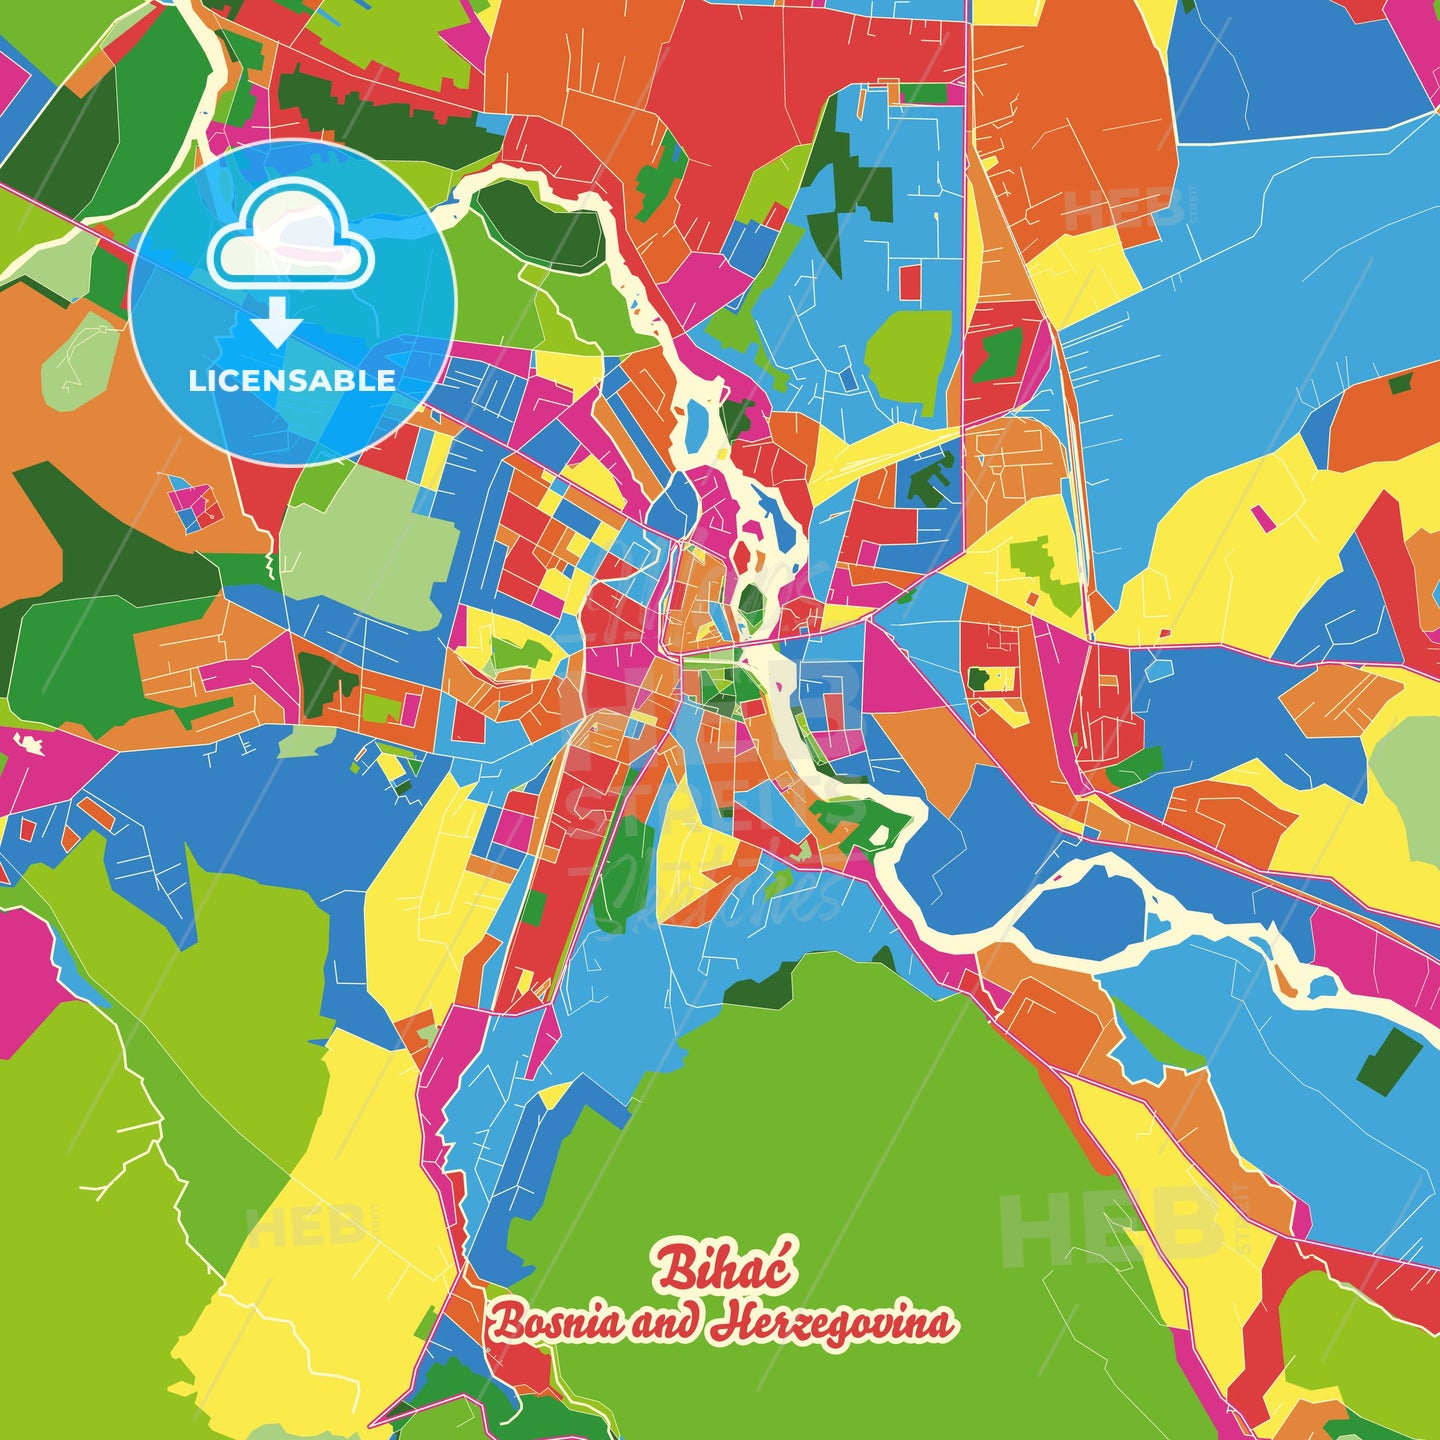 Bihać, Bosnia and Herzegovina Crazy Colorful Street Map Poster Template - HEBSTREITS Sketches